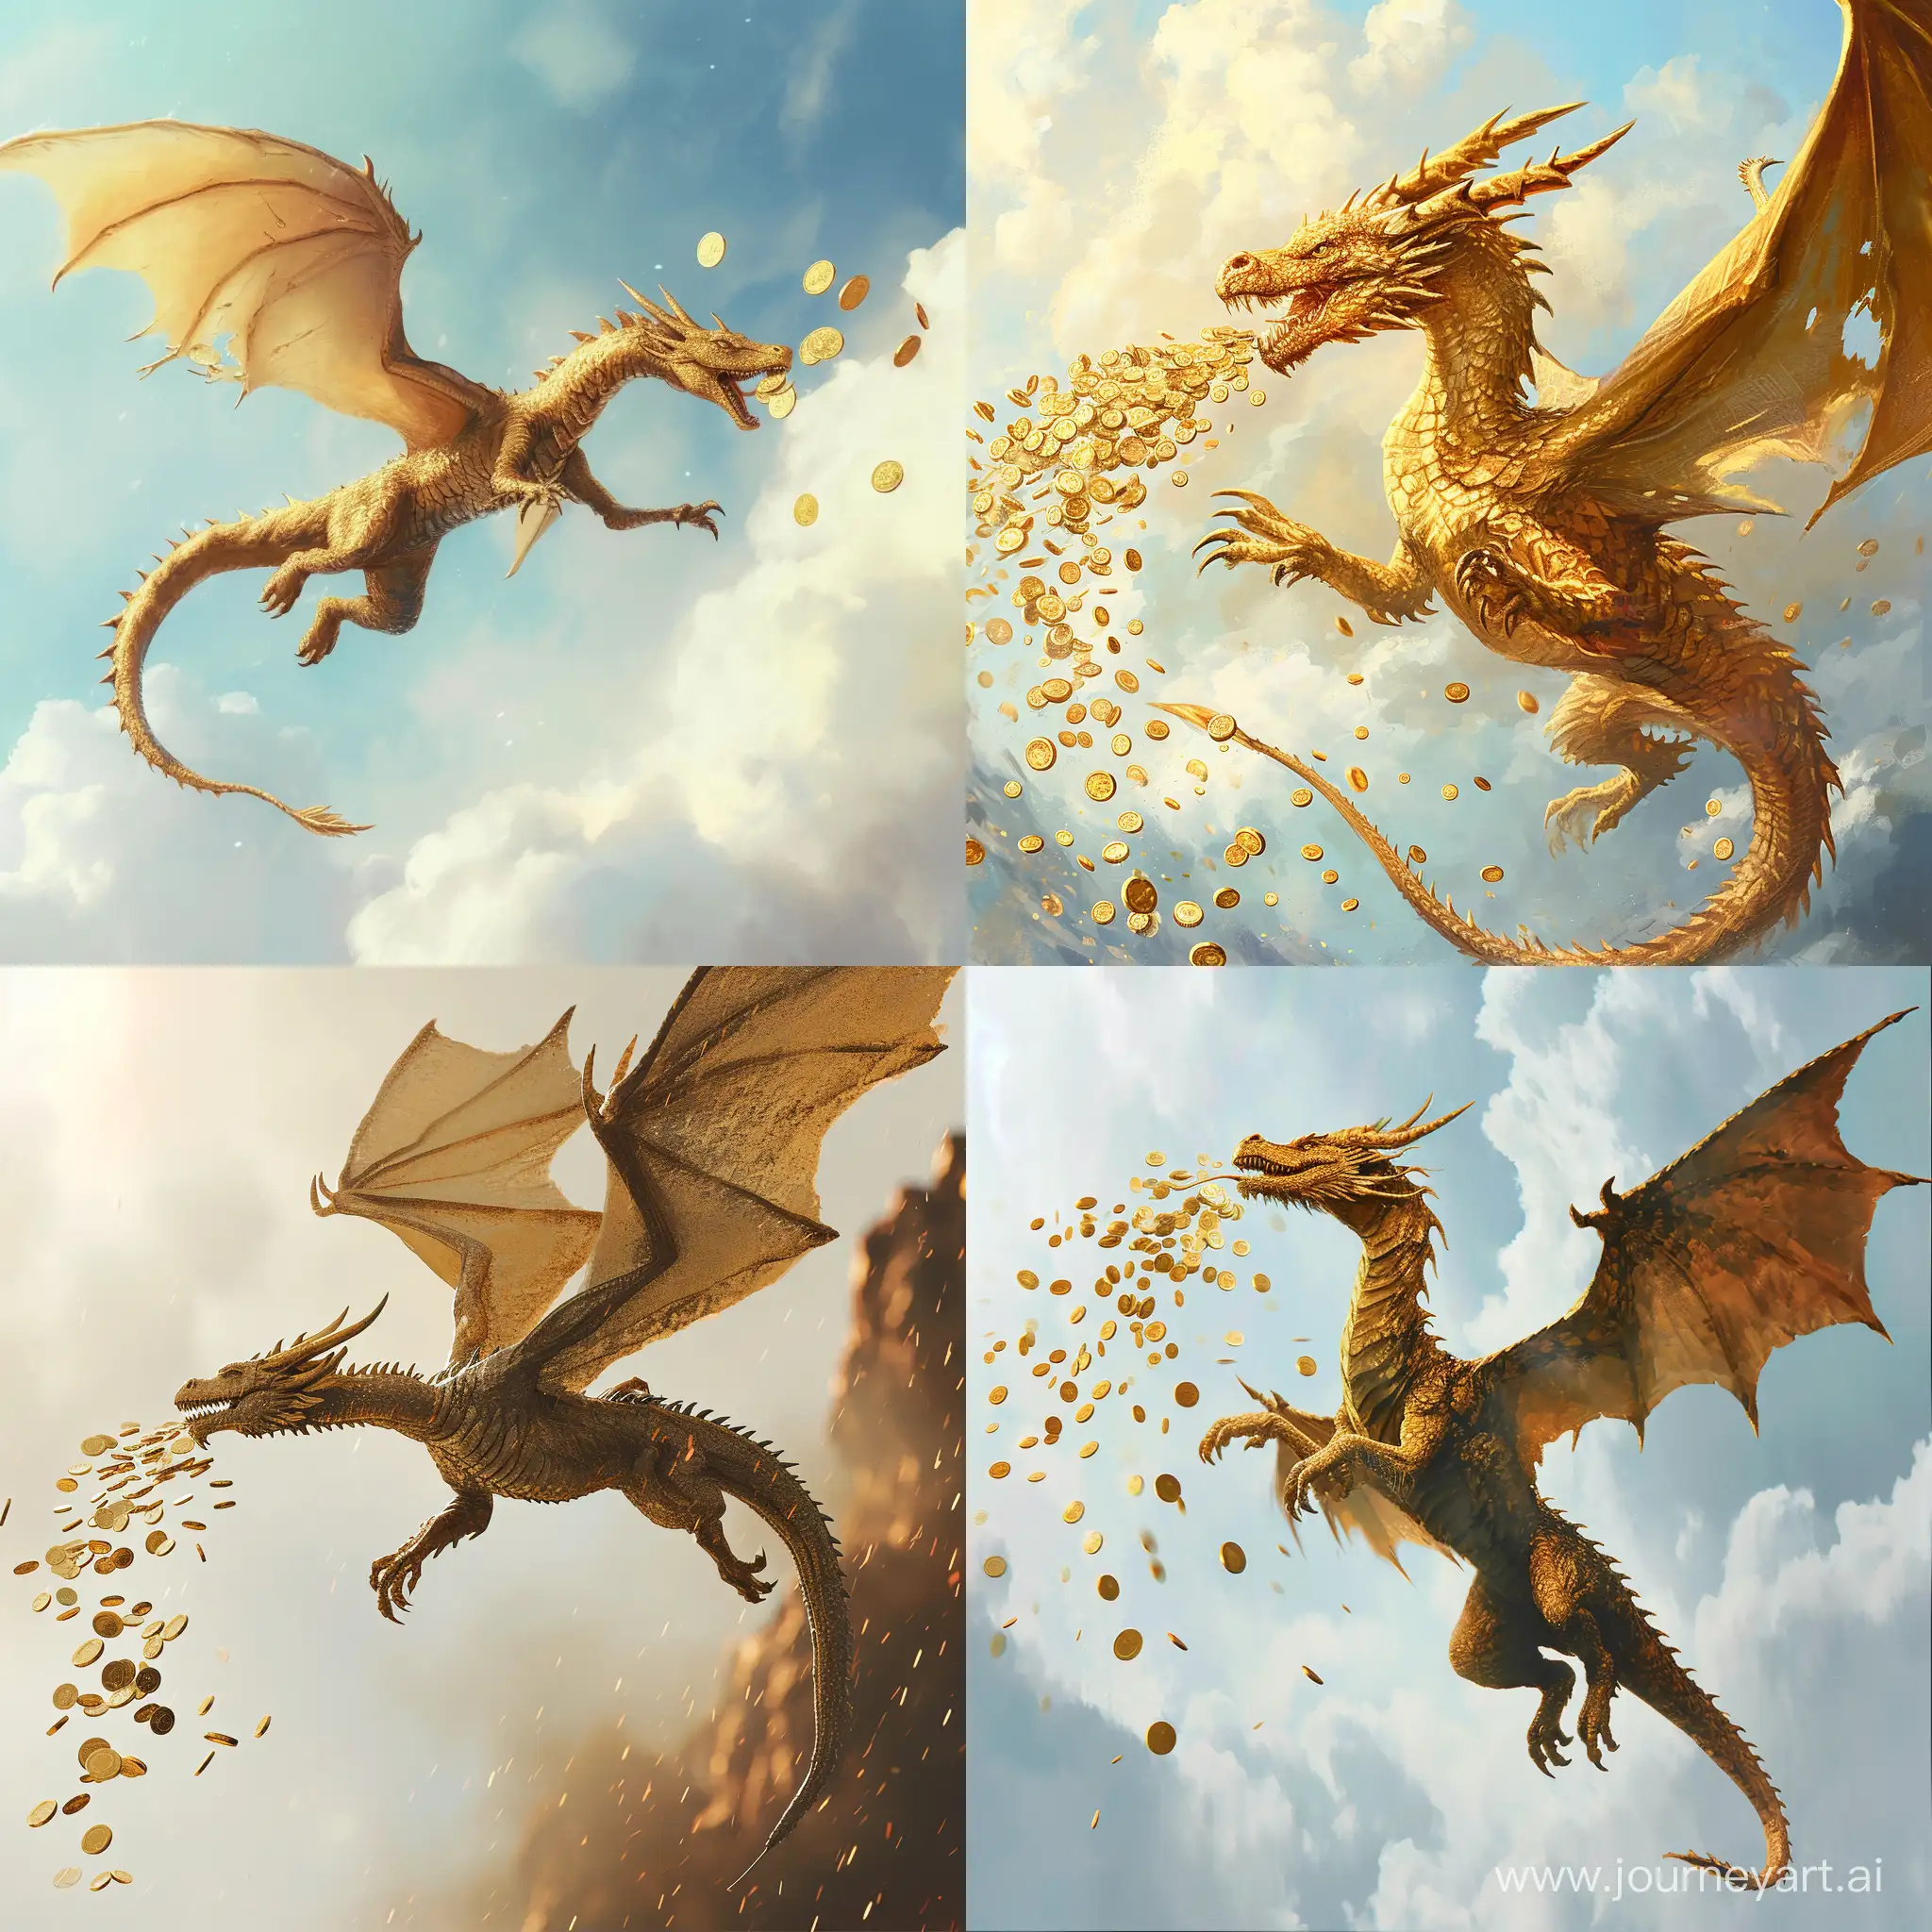 a golden dragon flying in the vanila sky, blowing gold coins, --v 6